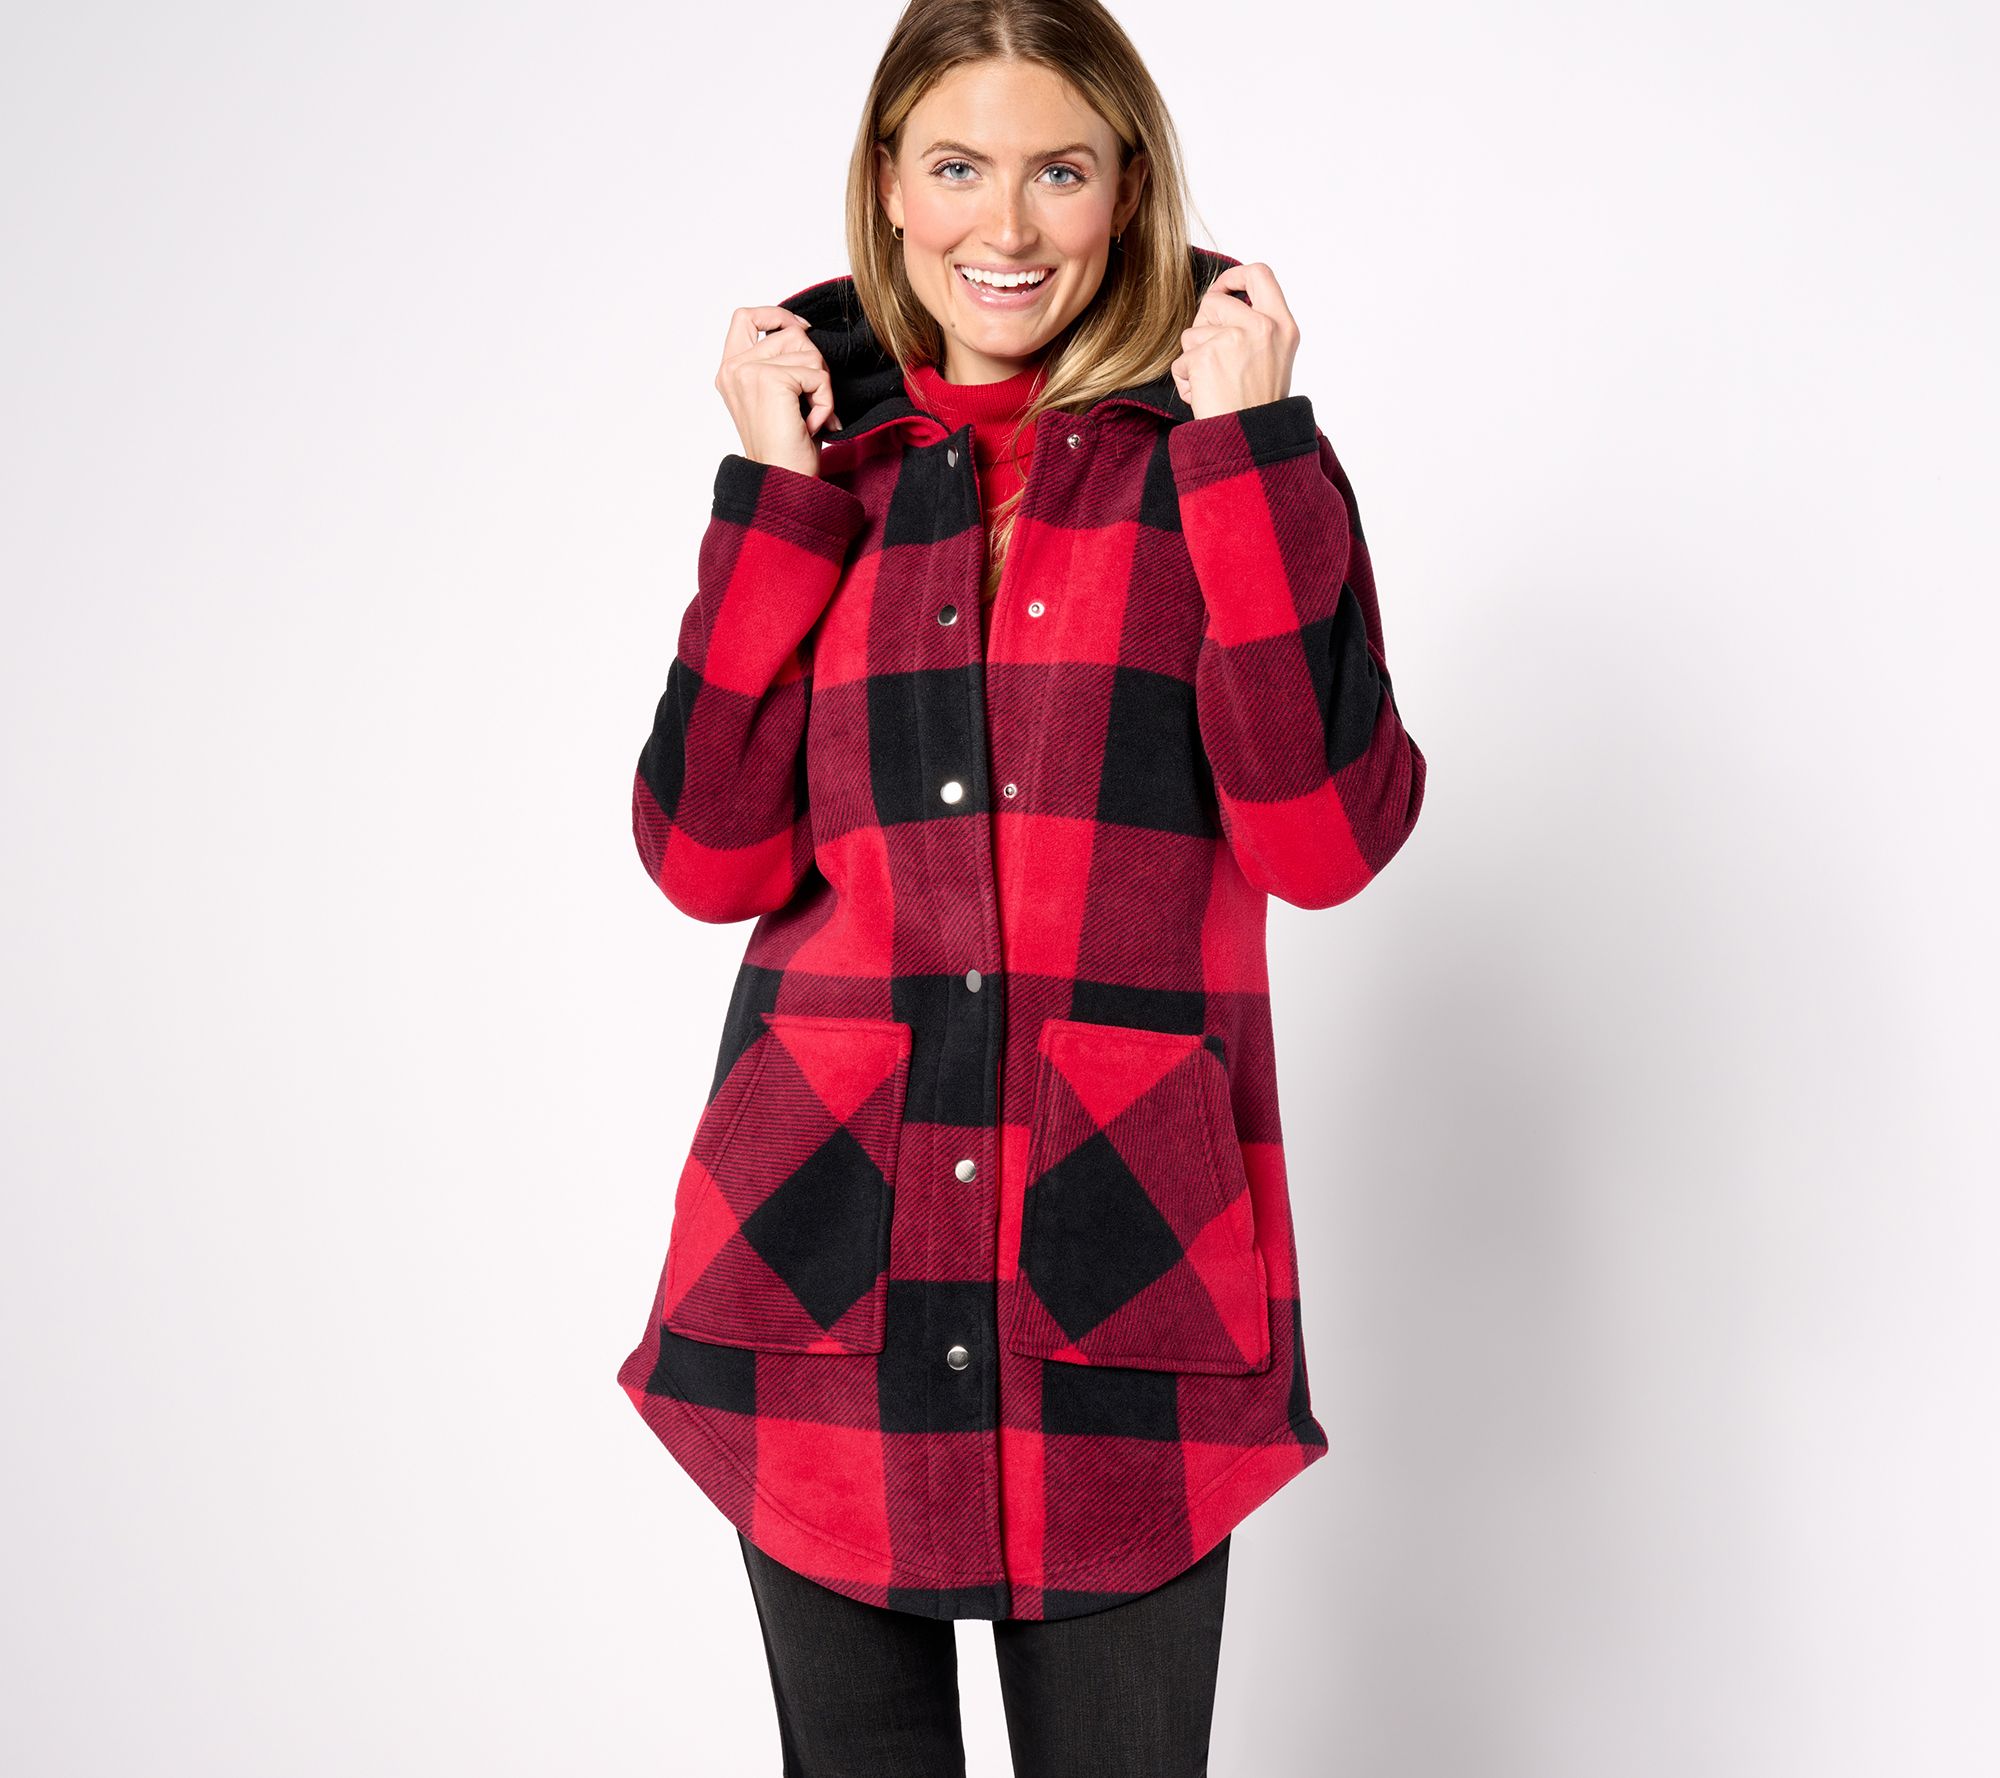 Denim & Co. Fleece Bonded with Sherpa Coat with Pockets - QVC.com